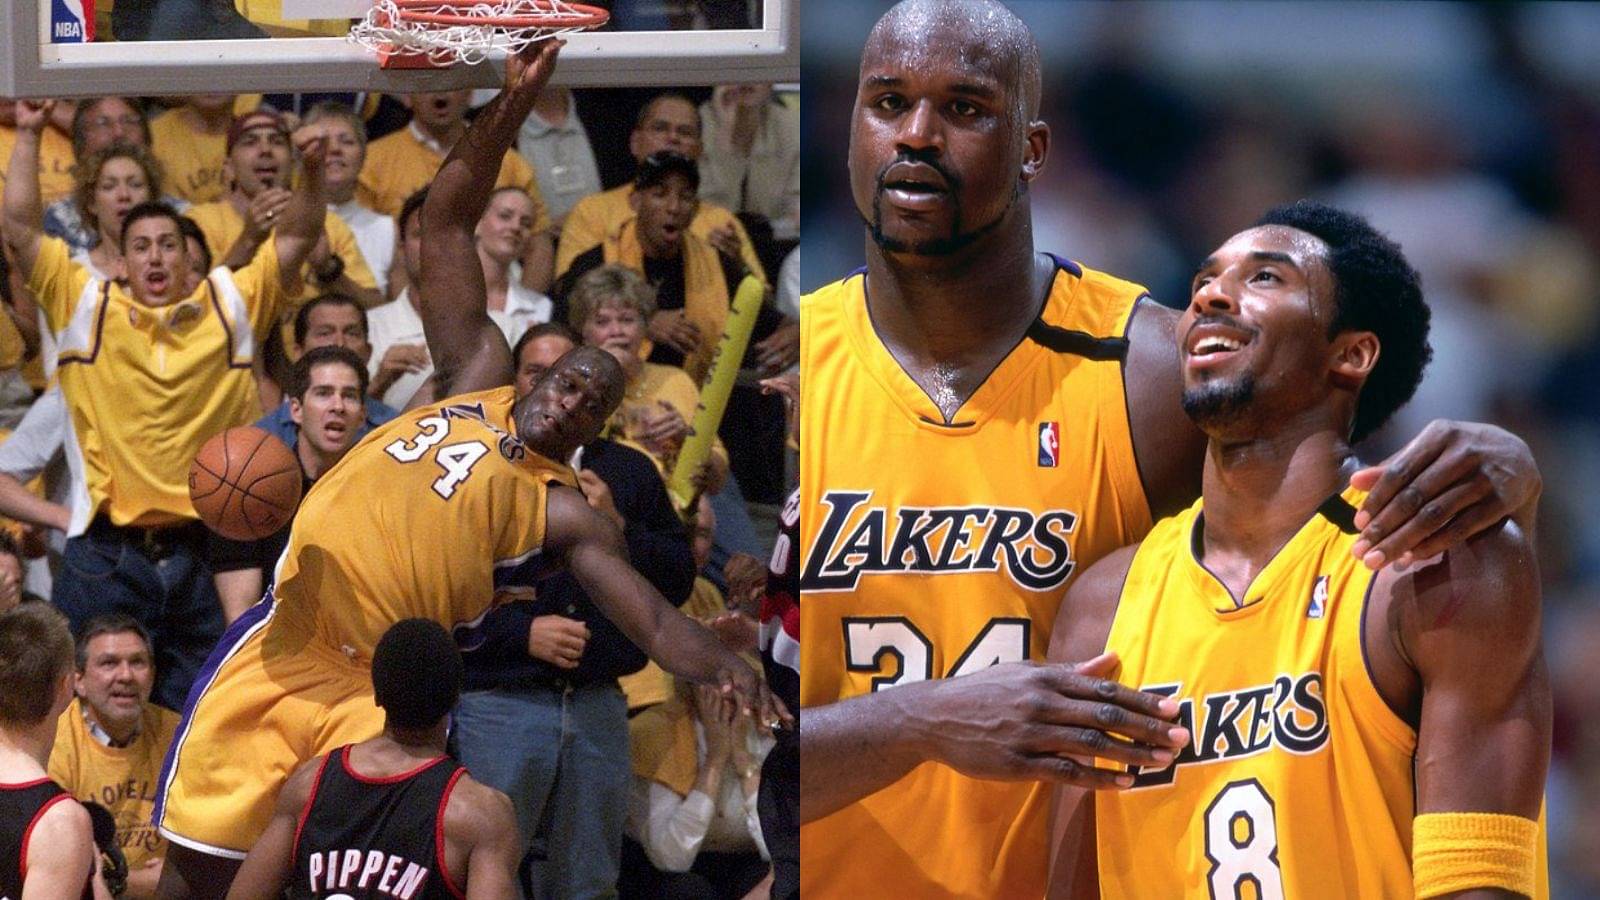 $75M Pistons legend believes Kobe Bryant 's iconic lob pass to Shaquille O'Neal in 2000 WCF was Lakers dynasty’s ‘deciding’ moment